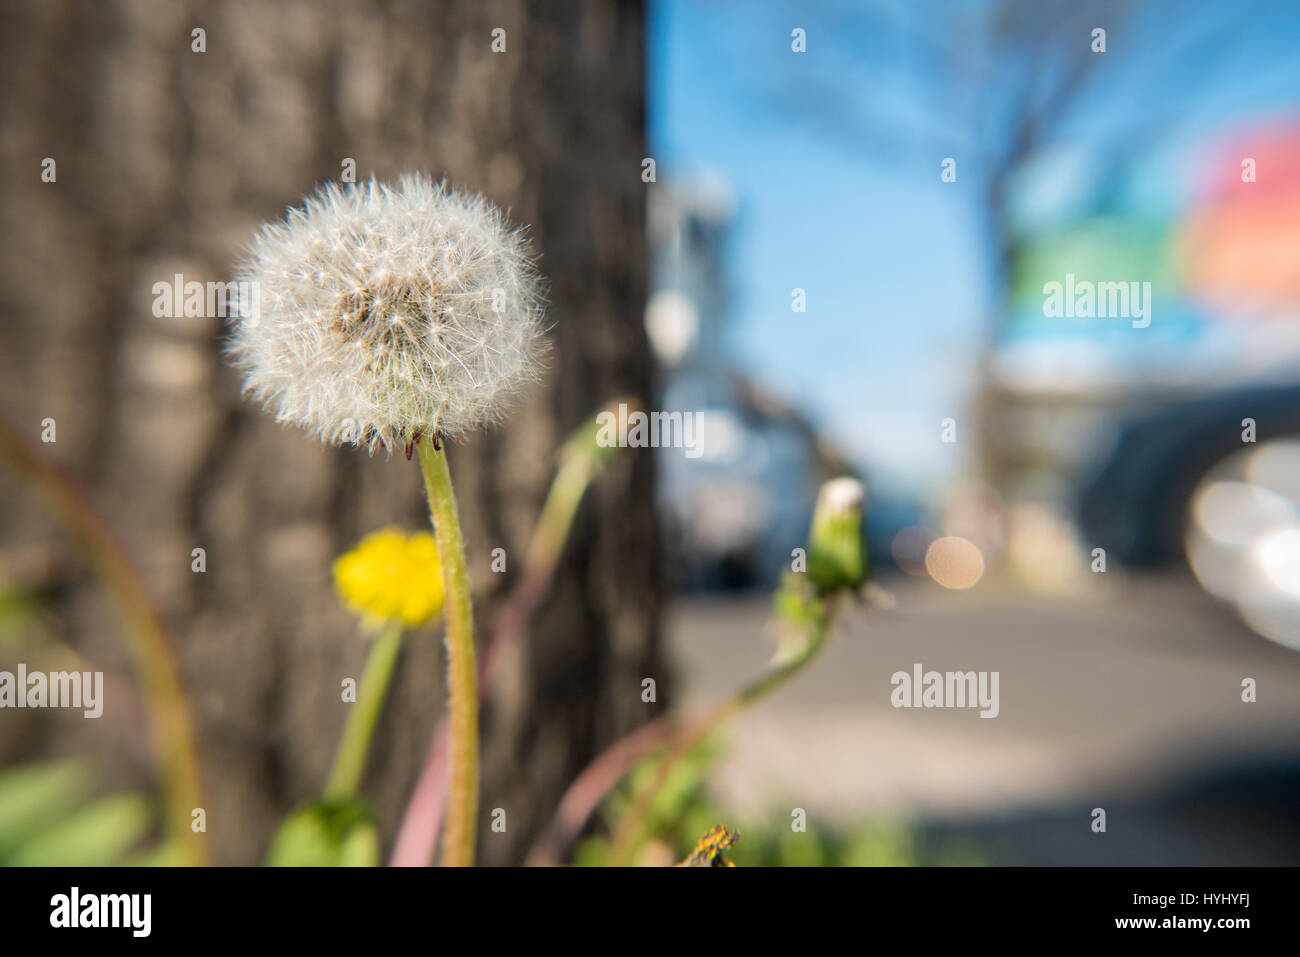 Dandelion blowball in front of a tree and a street Stock Photo